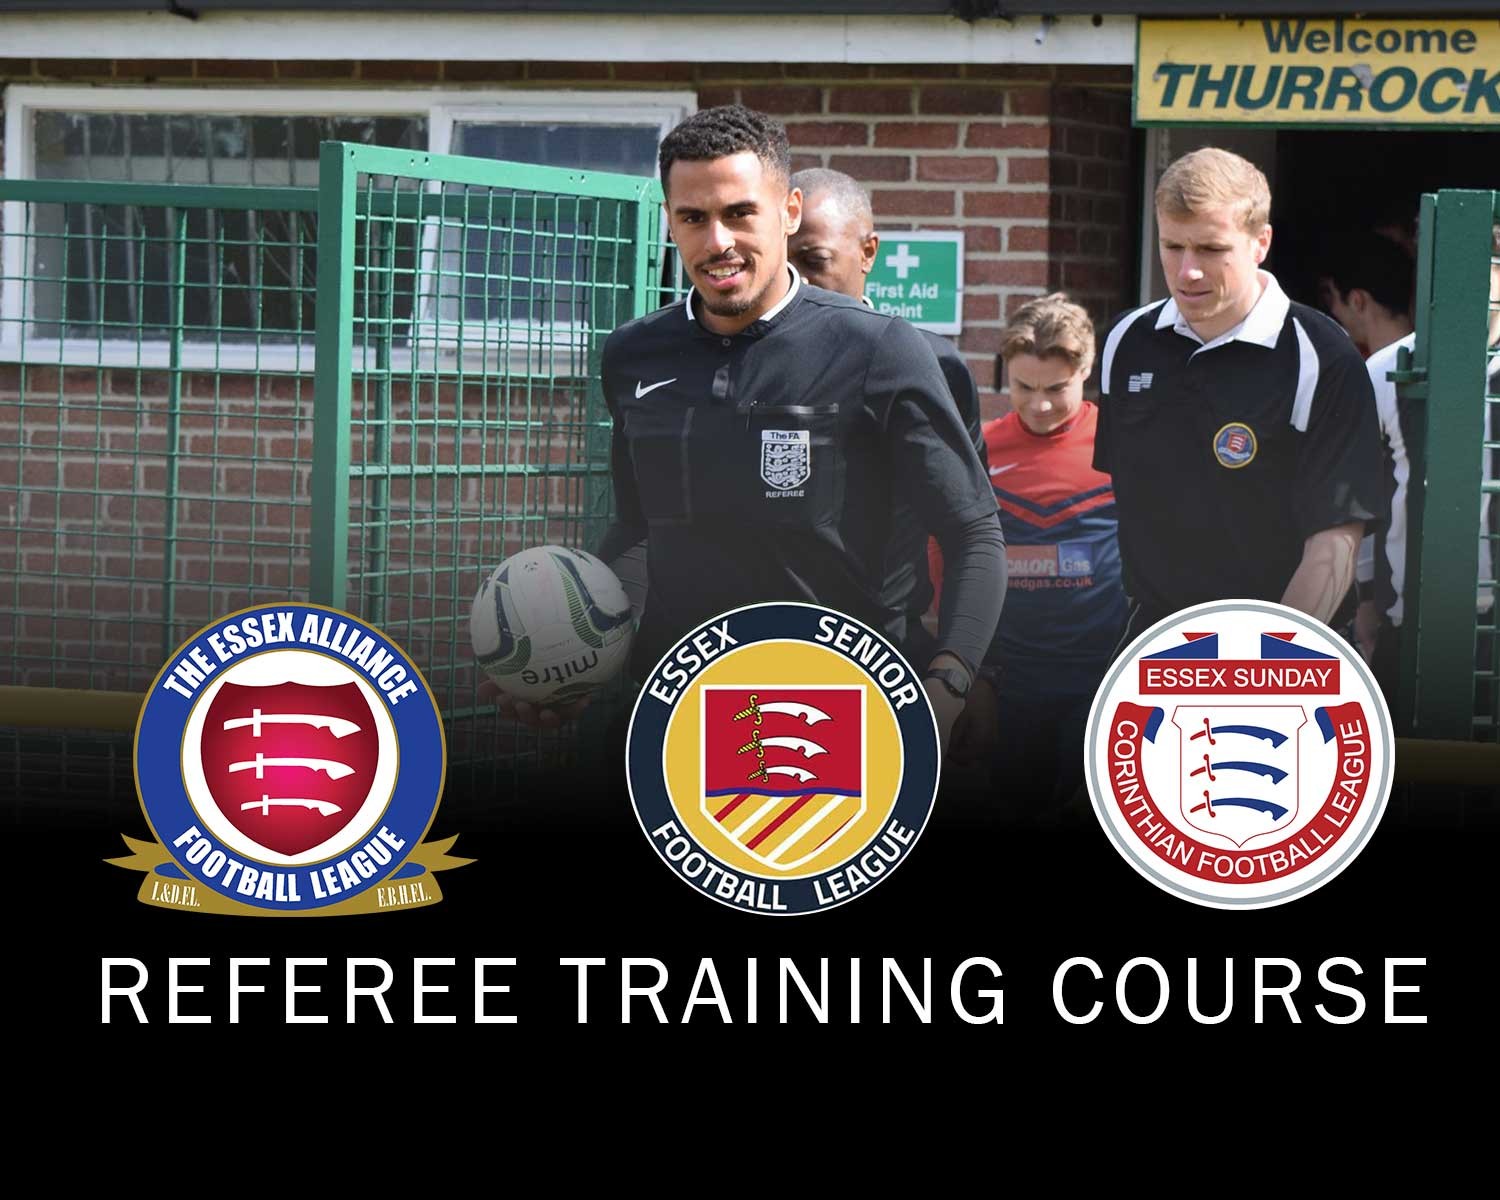 Local league partnership to subsidise another new referees training course